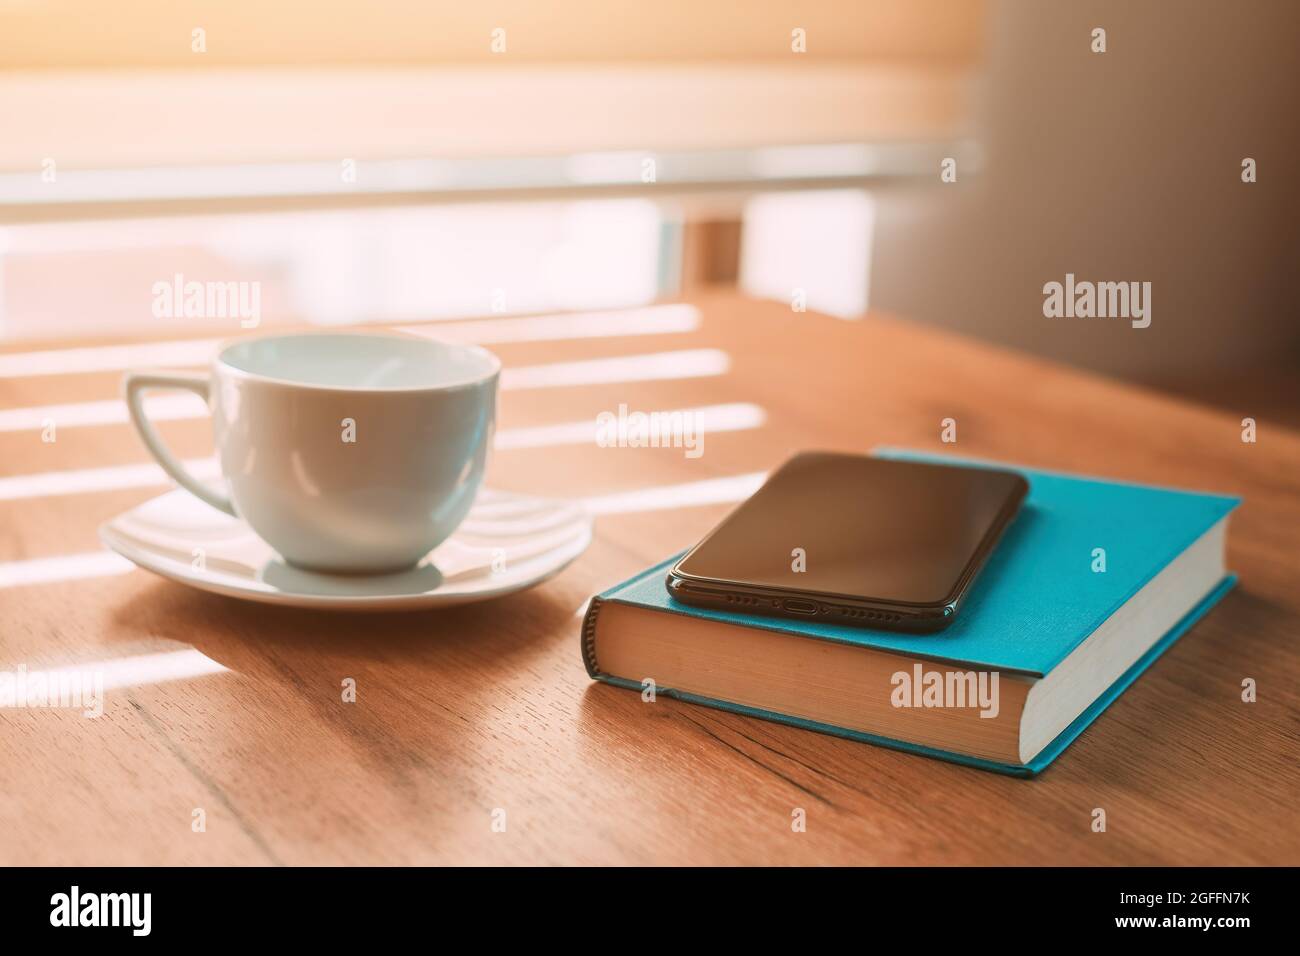 Cup of coffee, mobile smart phone and a book on the table in morning, selective focus Stock Photo